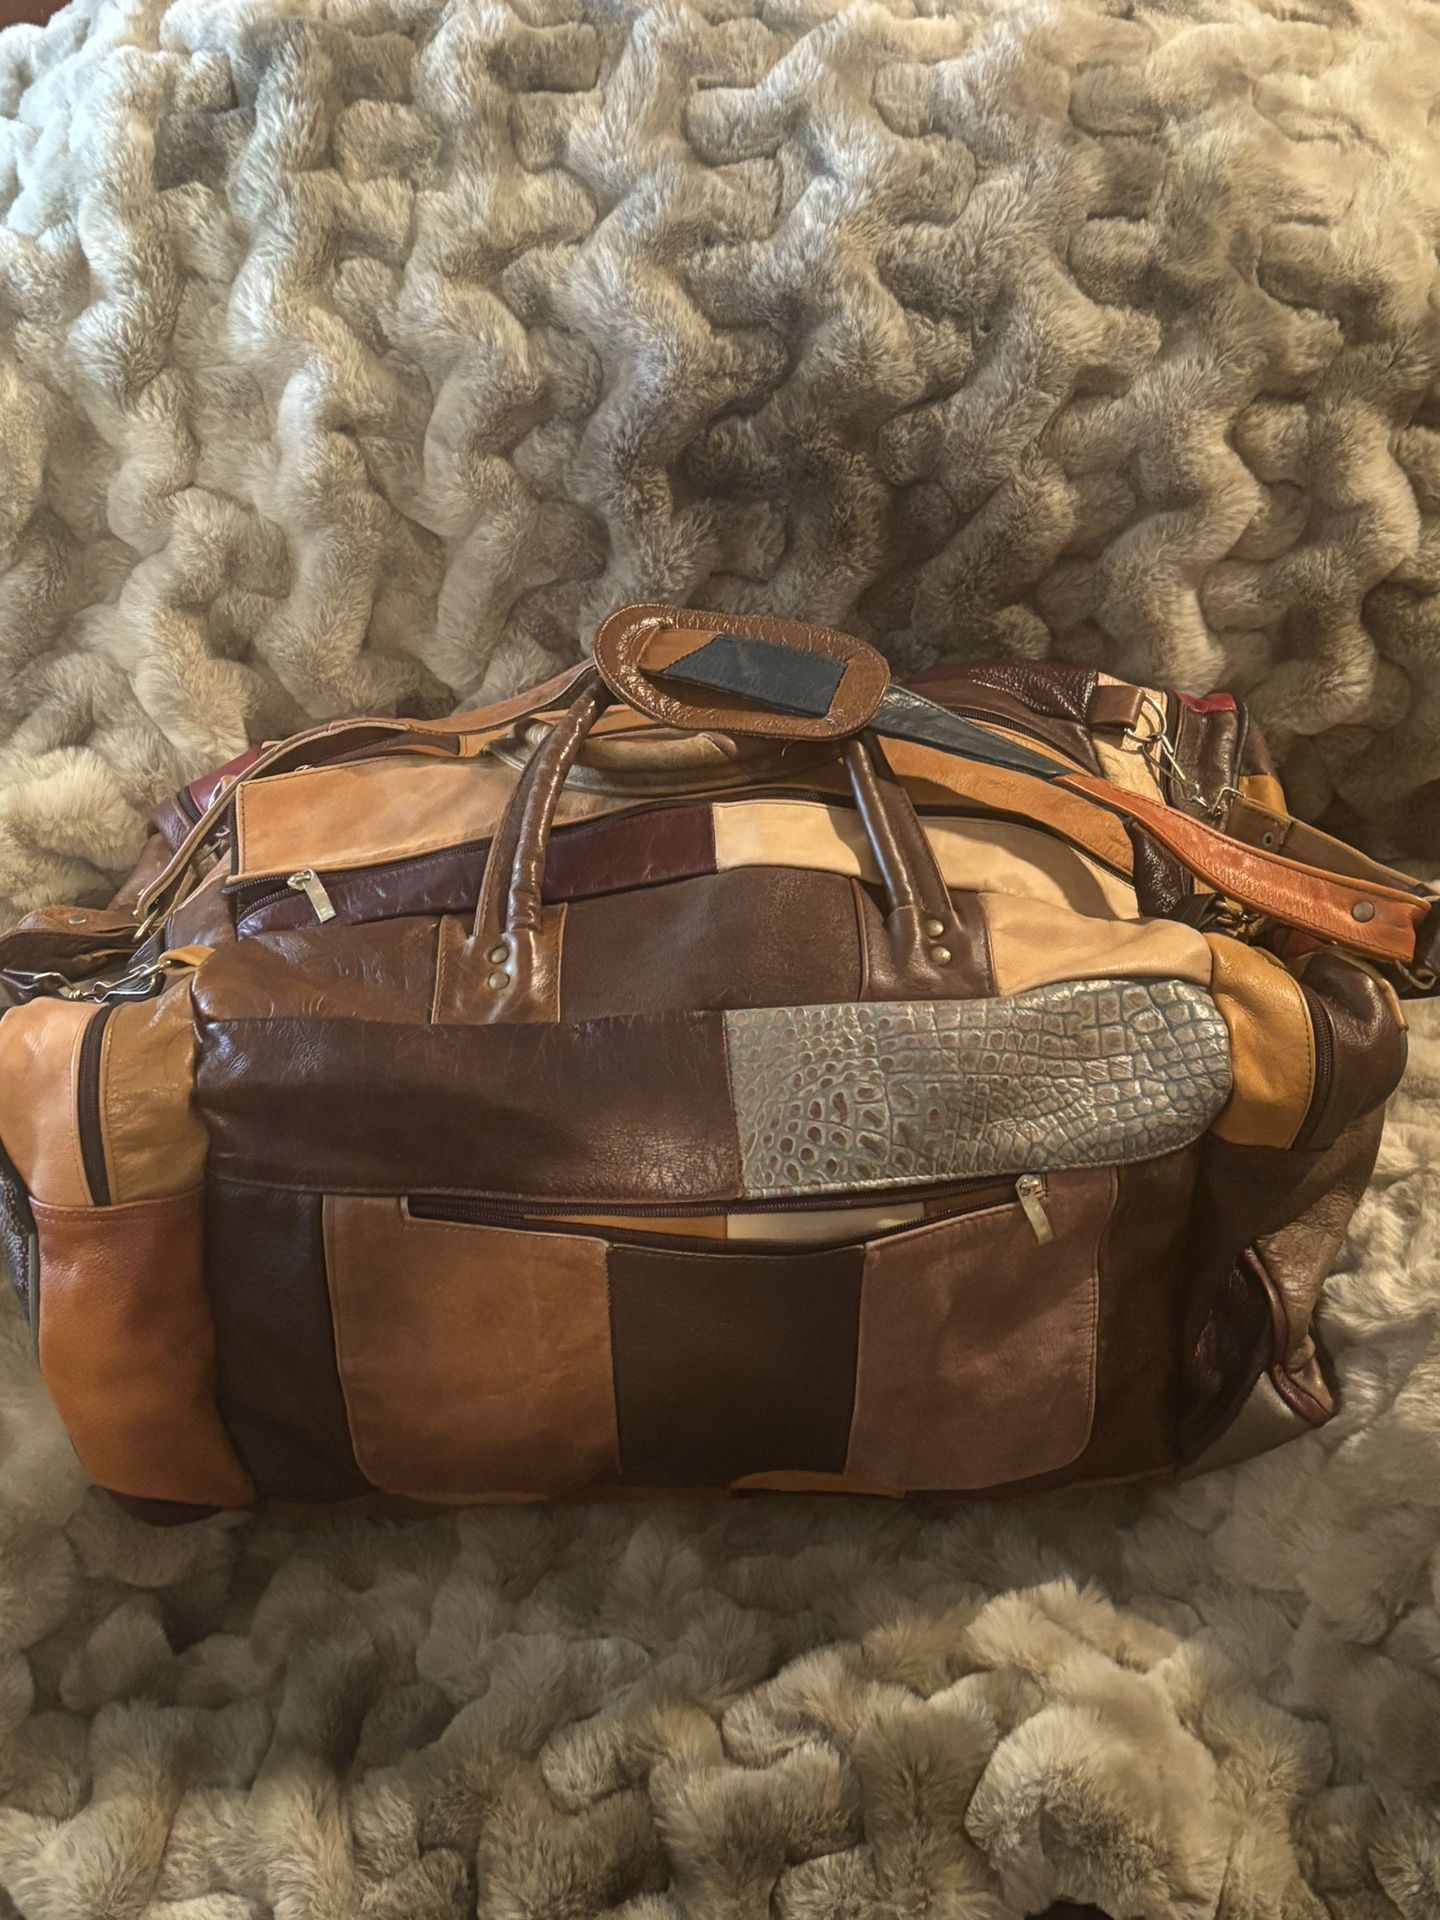 Handmade patchwork, genuine, leather duffel bag, one of a kind from Mexico